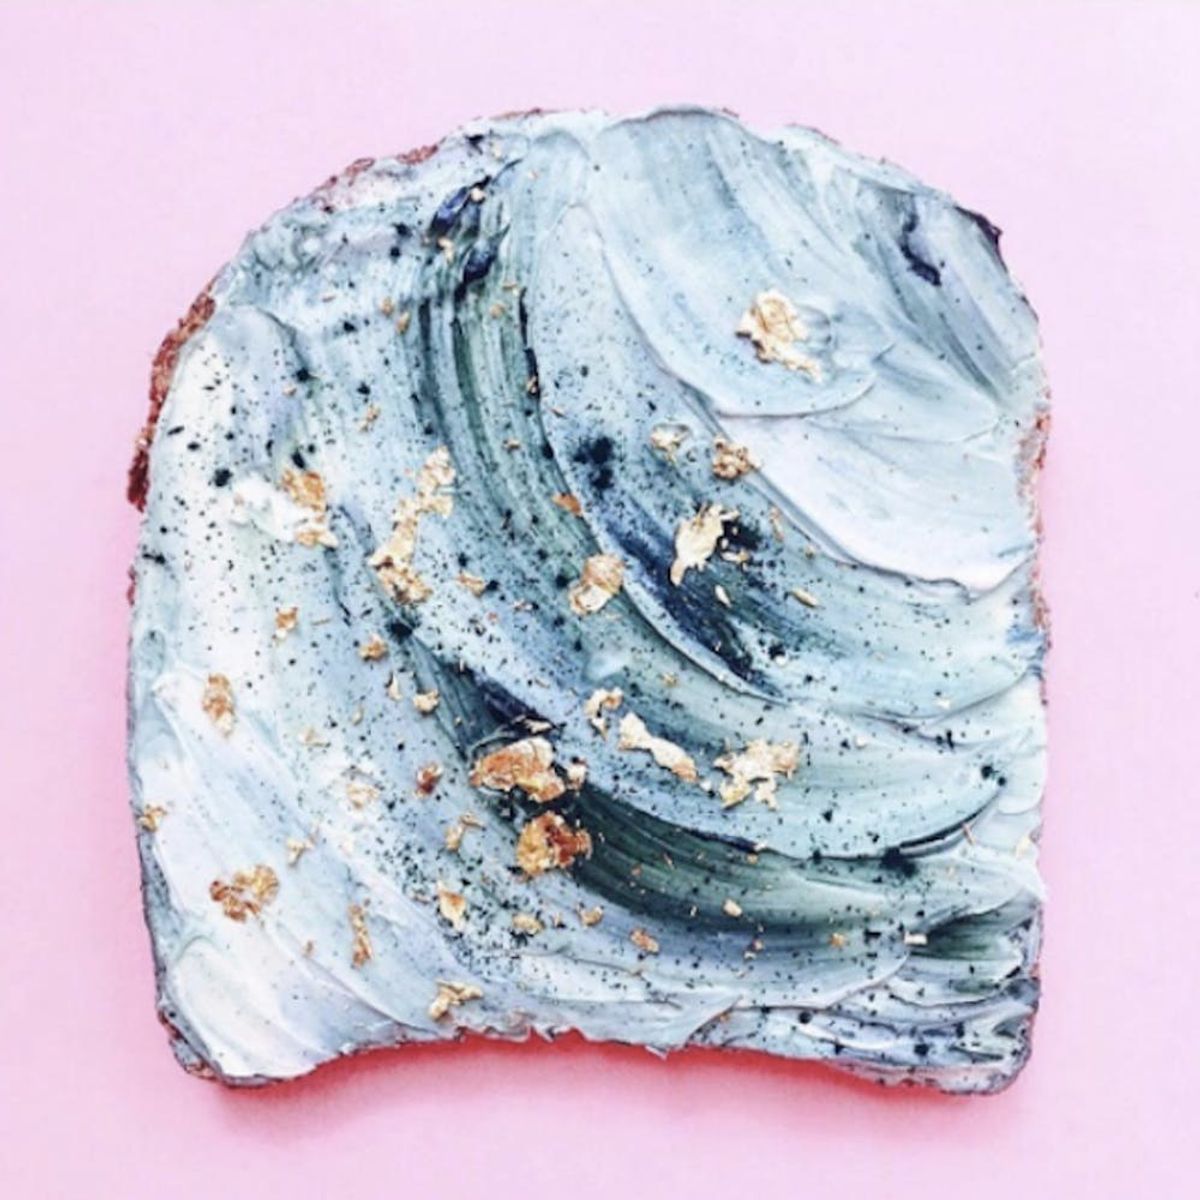 Mermaid Toast Is the Latest Instagram Food Trend, and We Are *in Love*